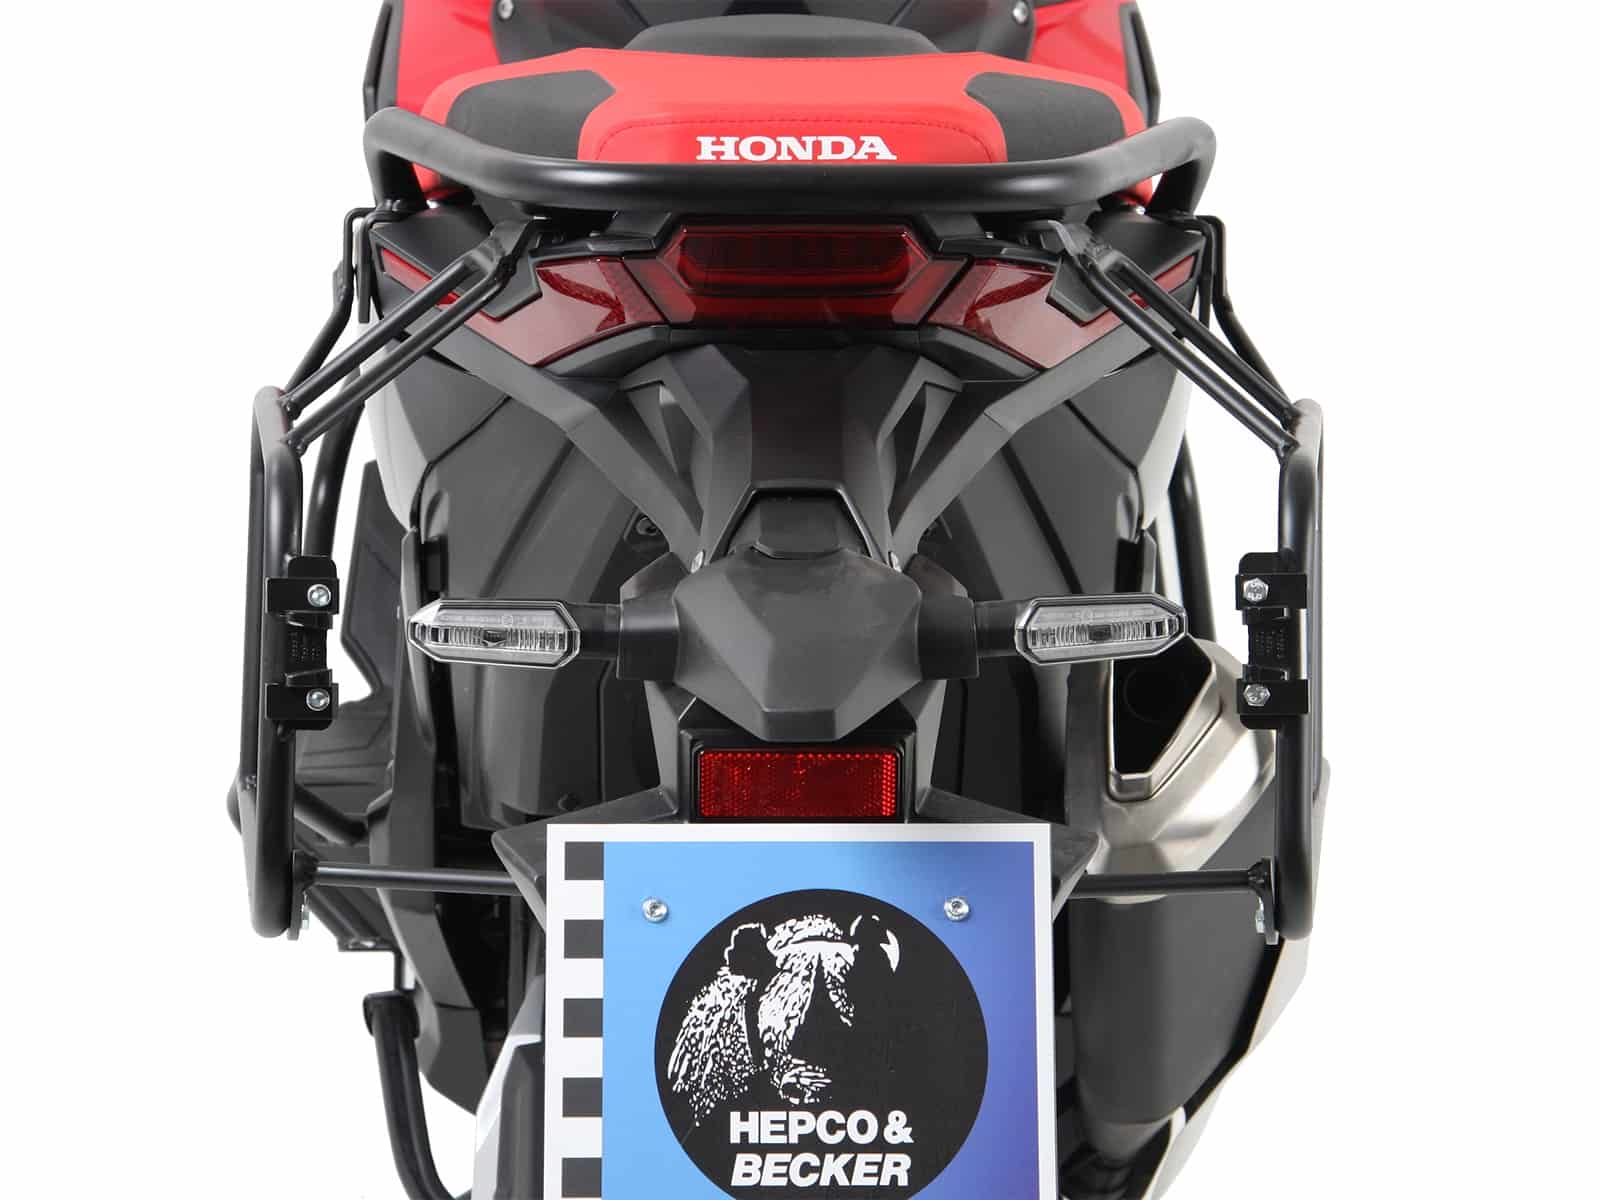 Sidecarrier permanent mounted black for Honda X-ADV (2017-2020)